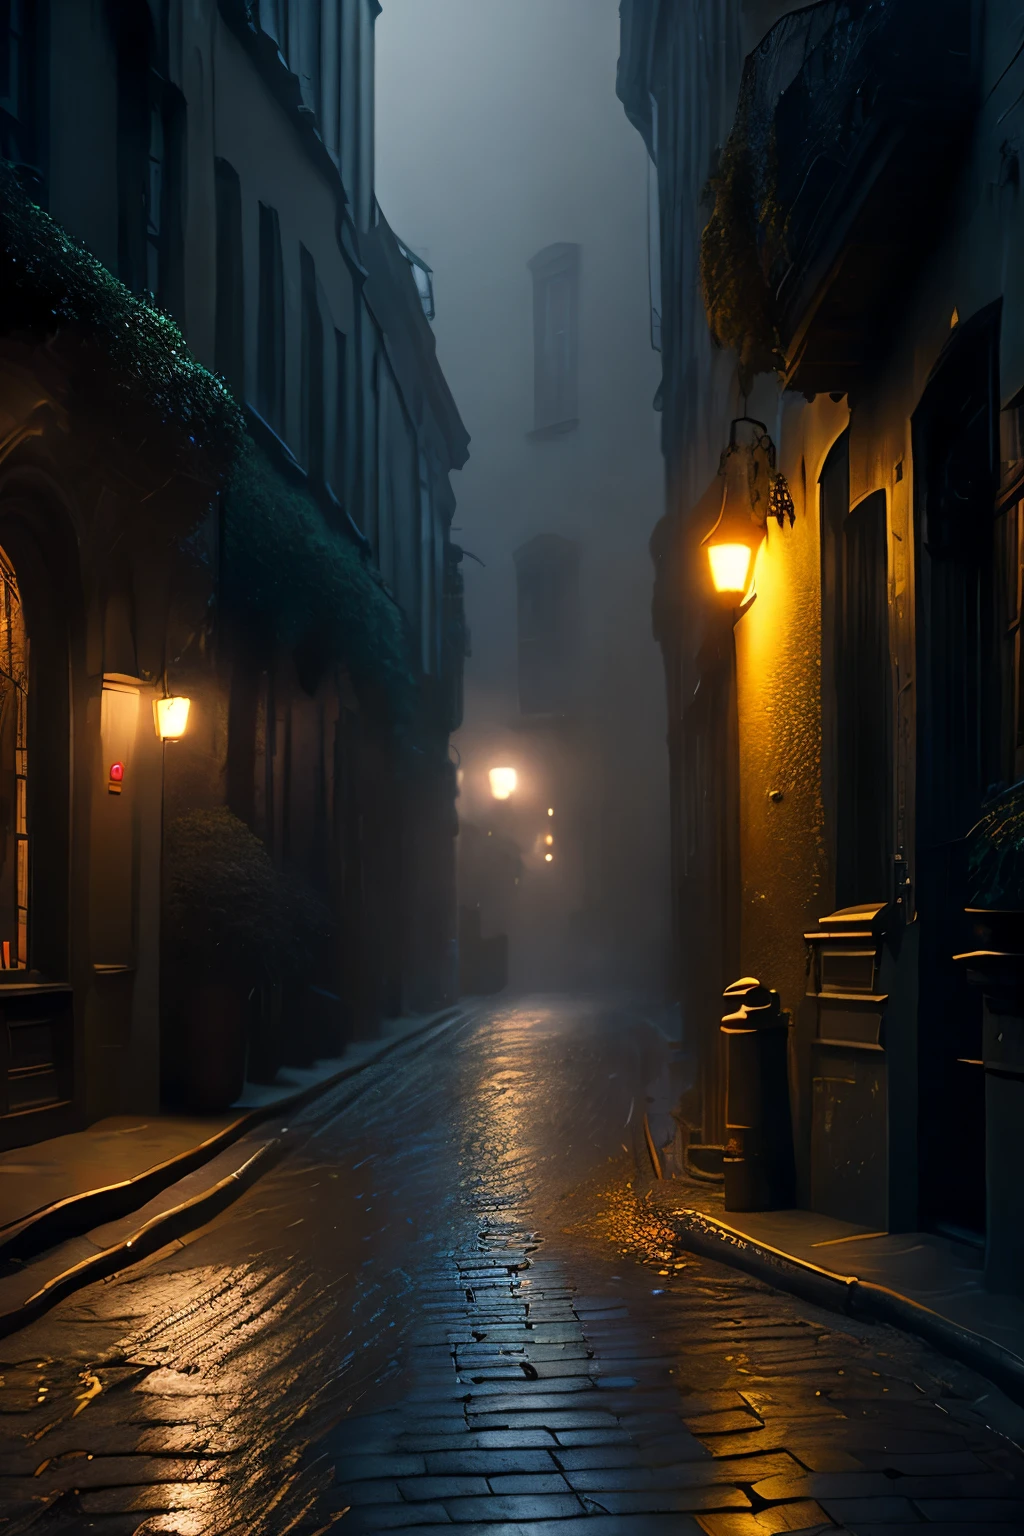 Dark alley on a gloomy, mystical,  and mysterious night, a floor made of wet cobblestones, with gutters running accumulated rainwater, a slightly torrential rain, a man with a hooded case distancing himself in steps of escape from something that pursues him lurking, intricate, realism, half-blurred image of escape movements, hazy and mucus tentacles subtly emerging in the corners of the mysterious street.